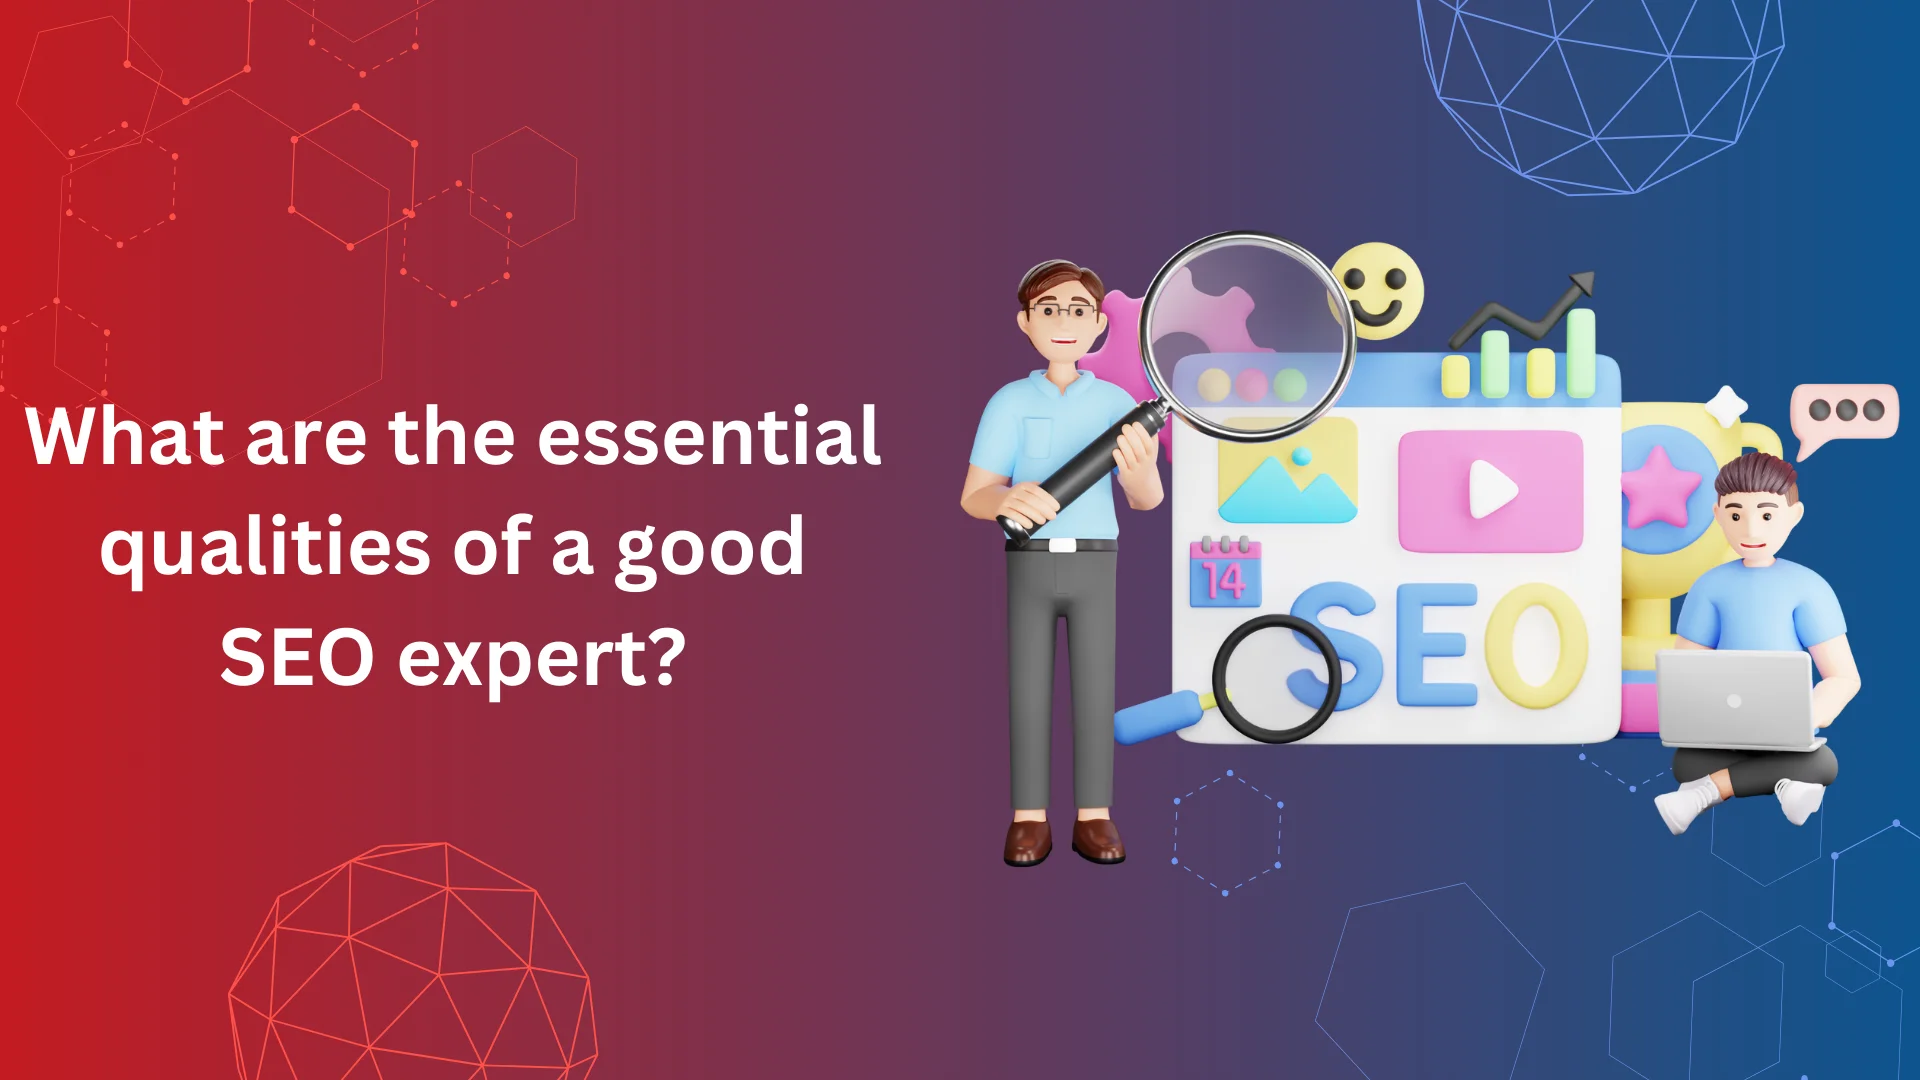 What are the essential qualities of a good SEO expert